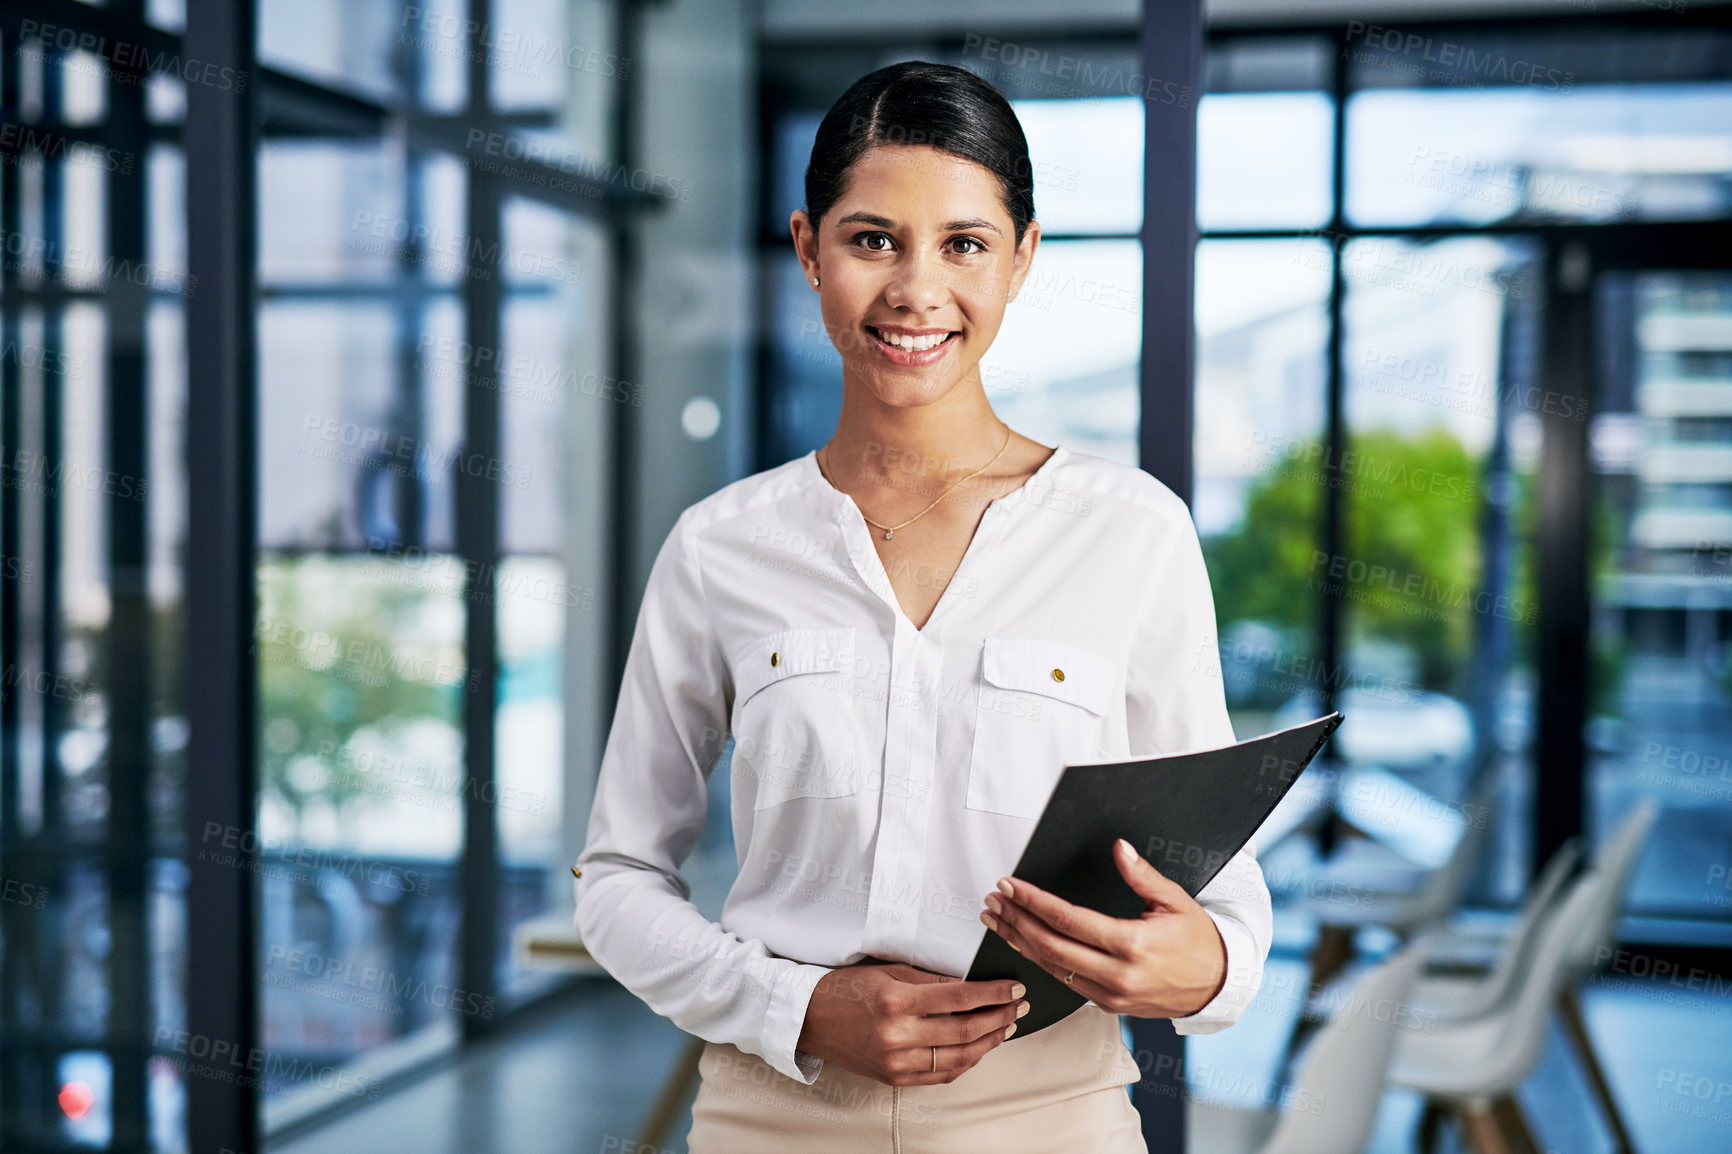 Buy stock photo Cropped portrait of an attractive young businesswoman smiling while holding a file in a modern office